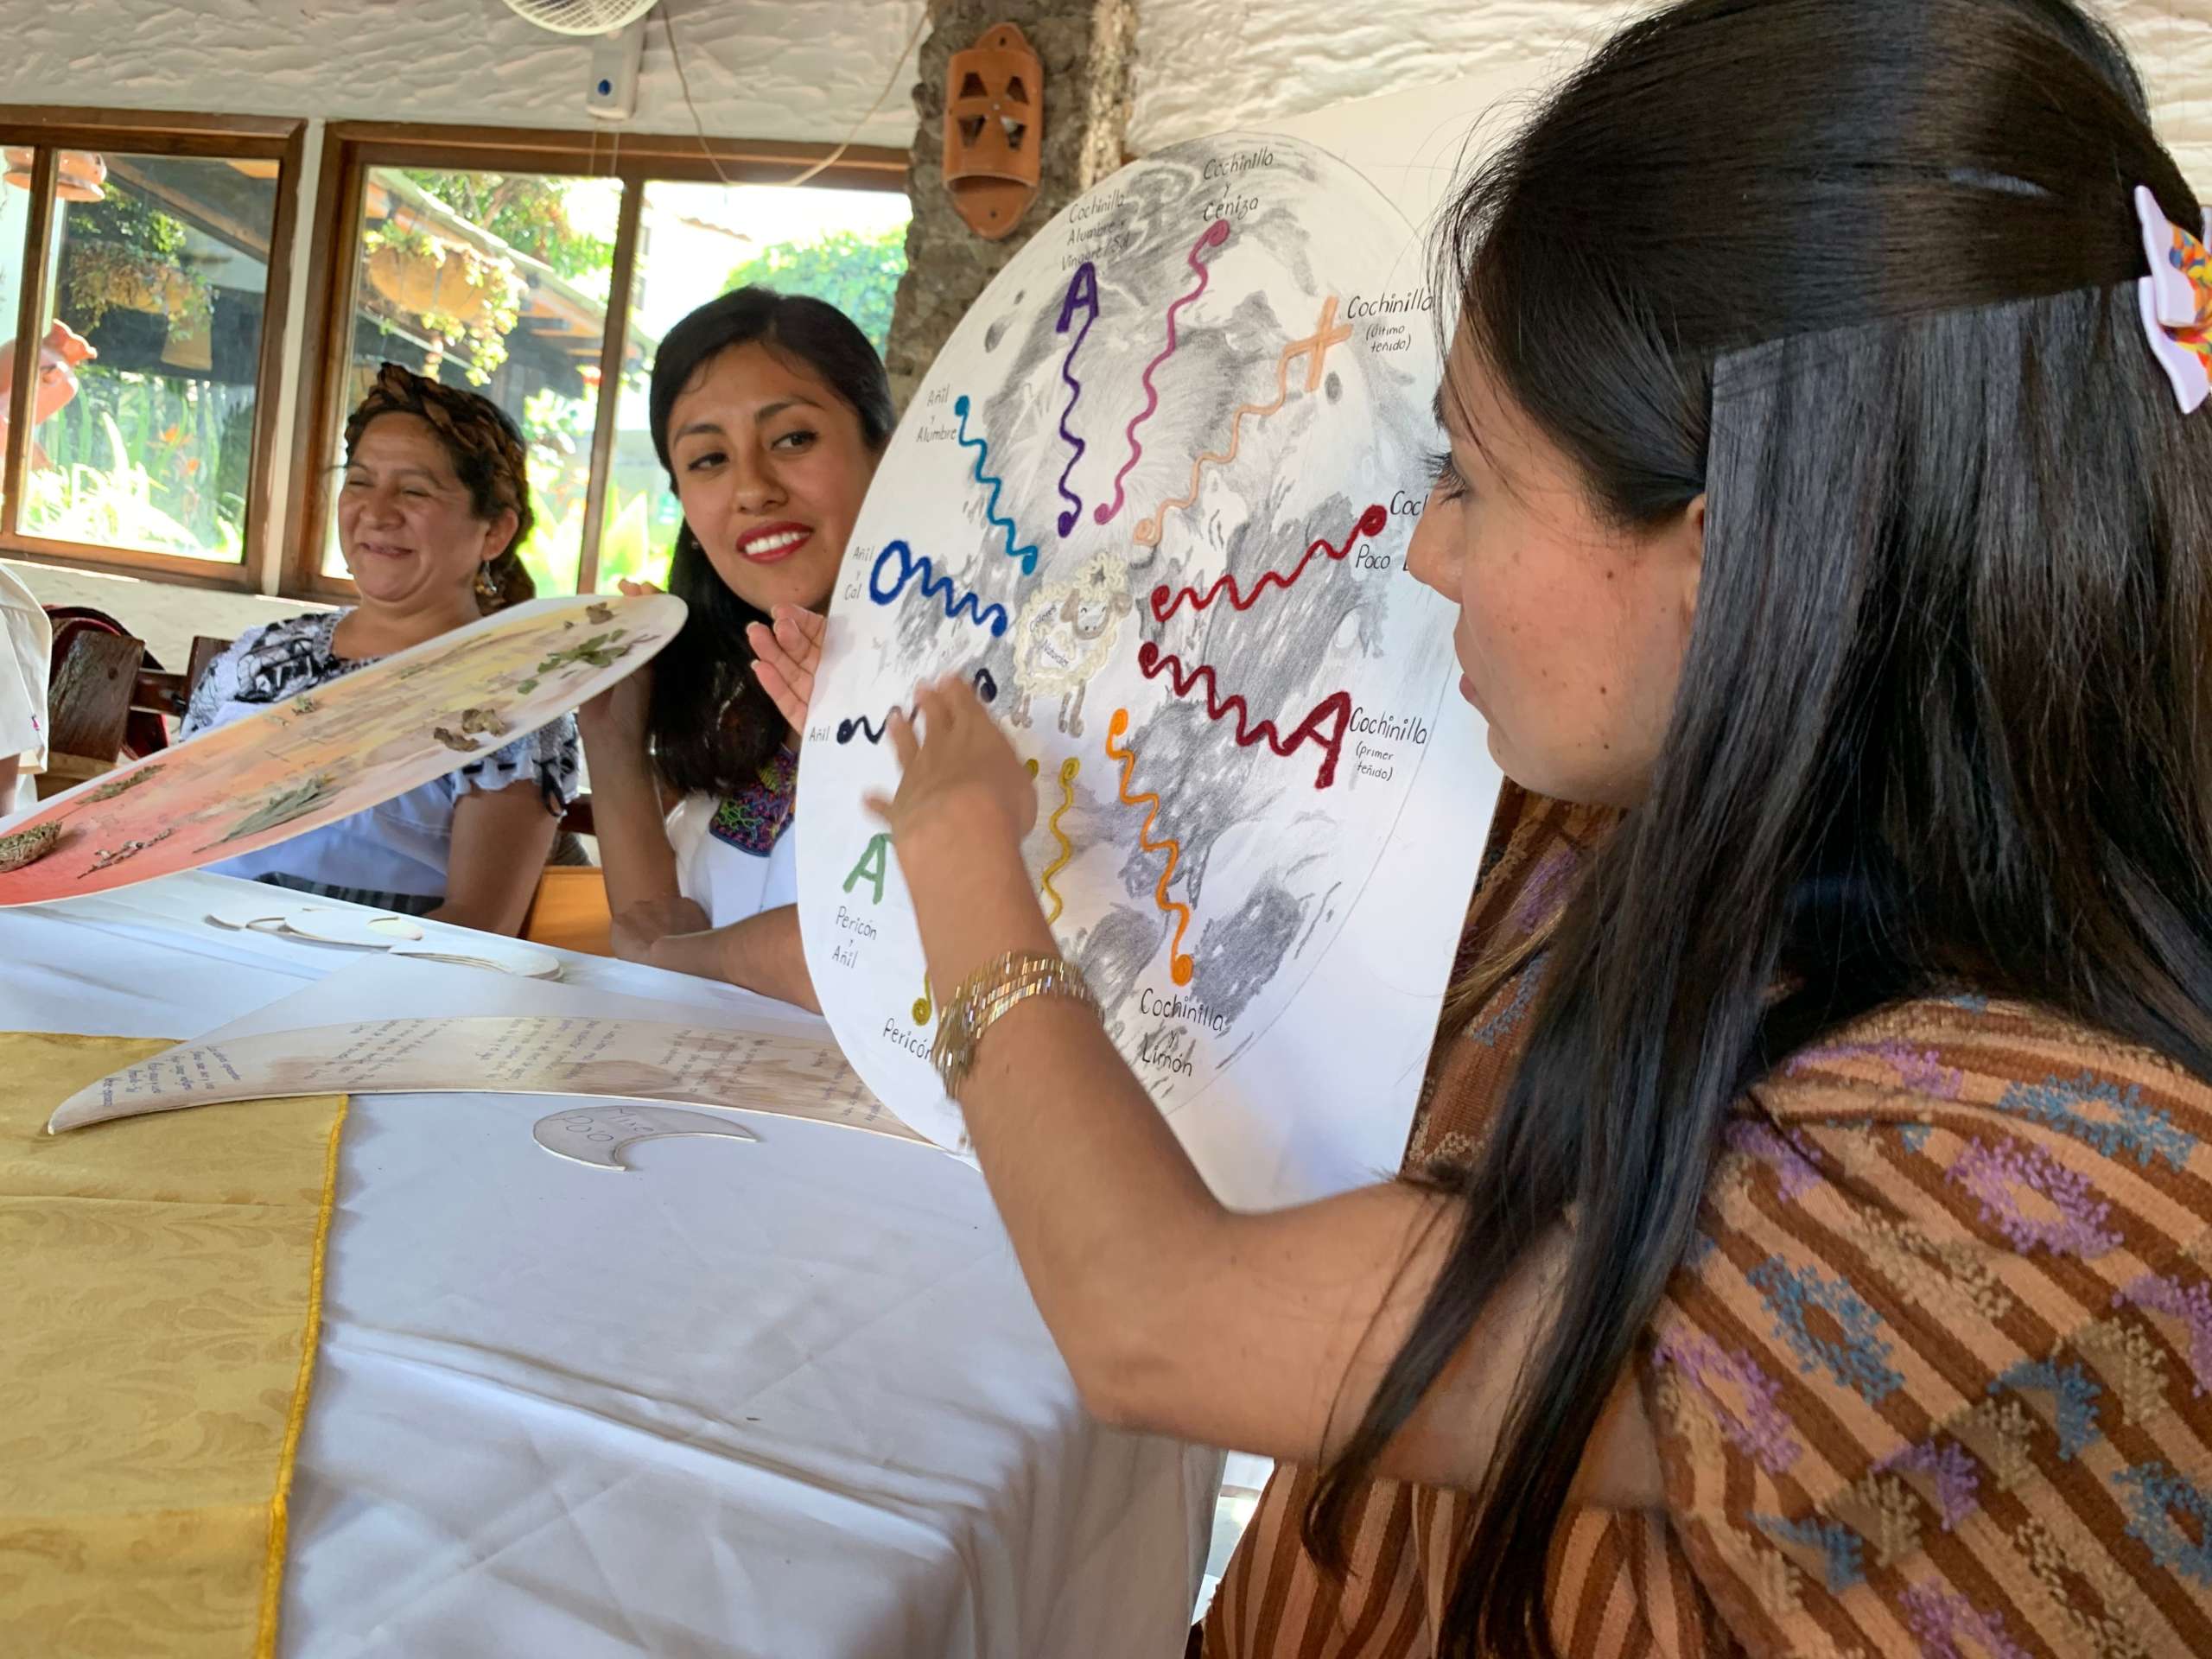  - Zapotec women from Oaxaca, Mexico present the results of their investigation on natural pigments. (Photo Credit: Nicola Wagenberg, The Cultural Conservancy)